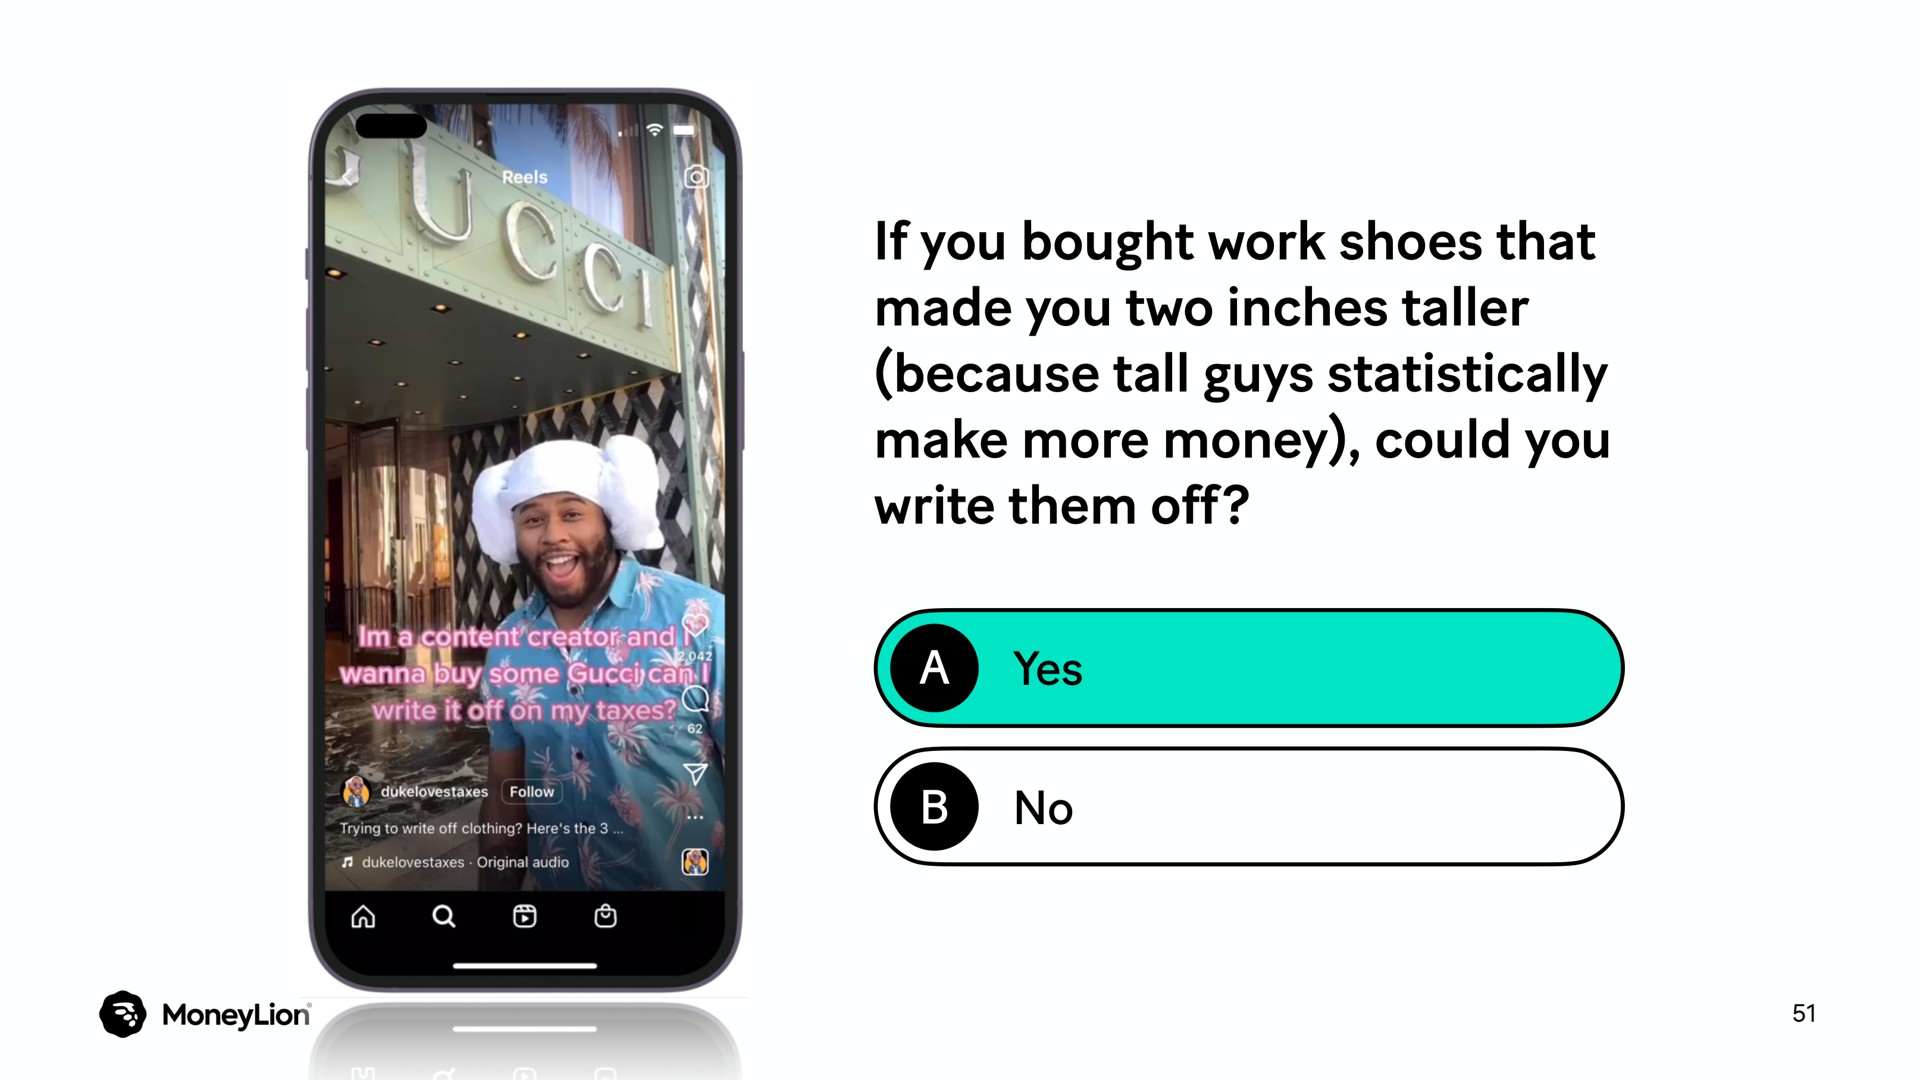 if you bought work shoes that made you two inches taller because tall guys statistically make more money could you write them off | MoneyLion